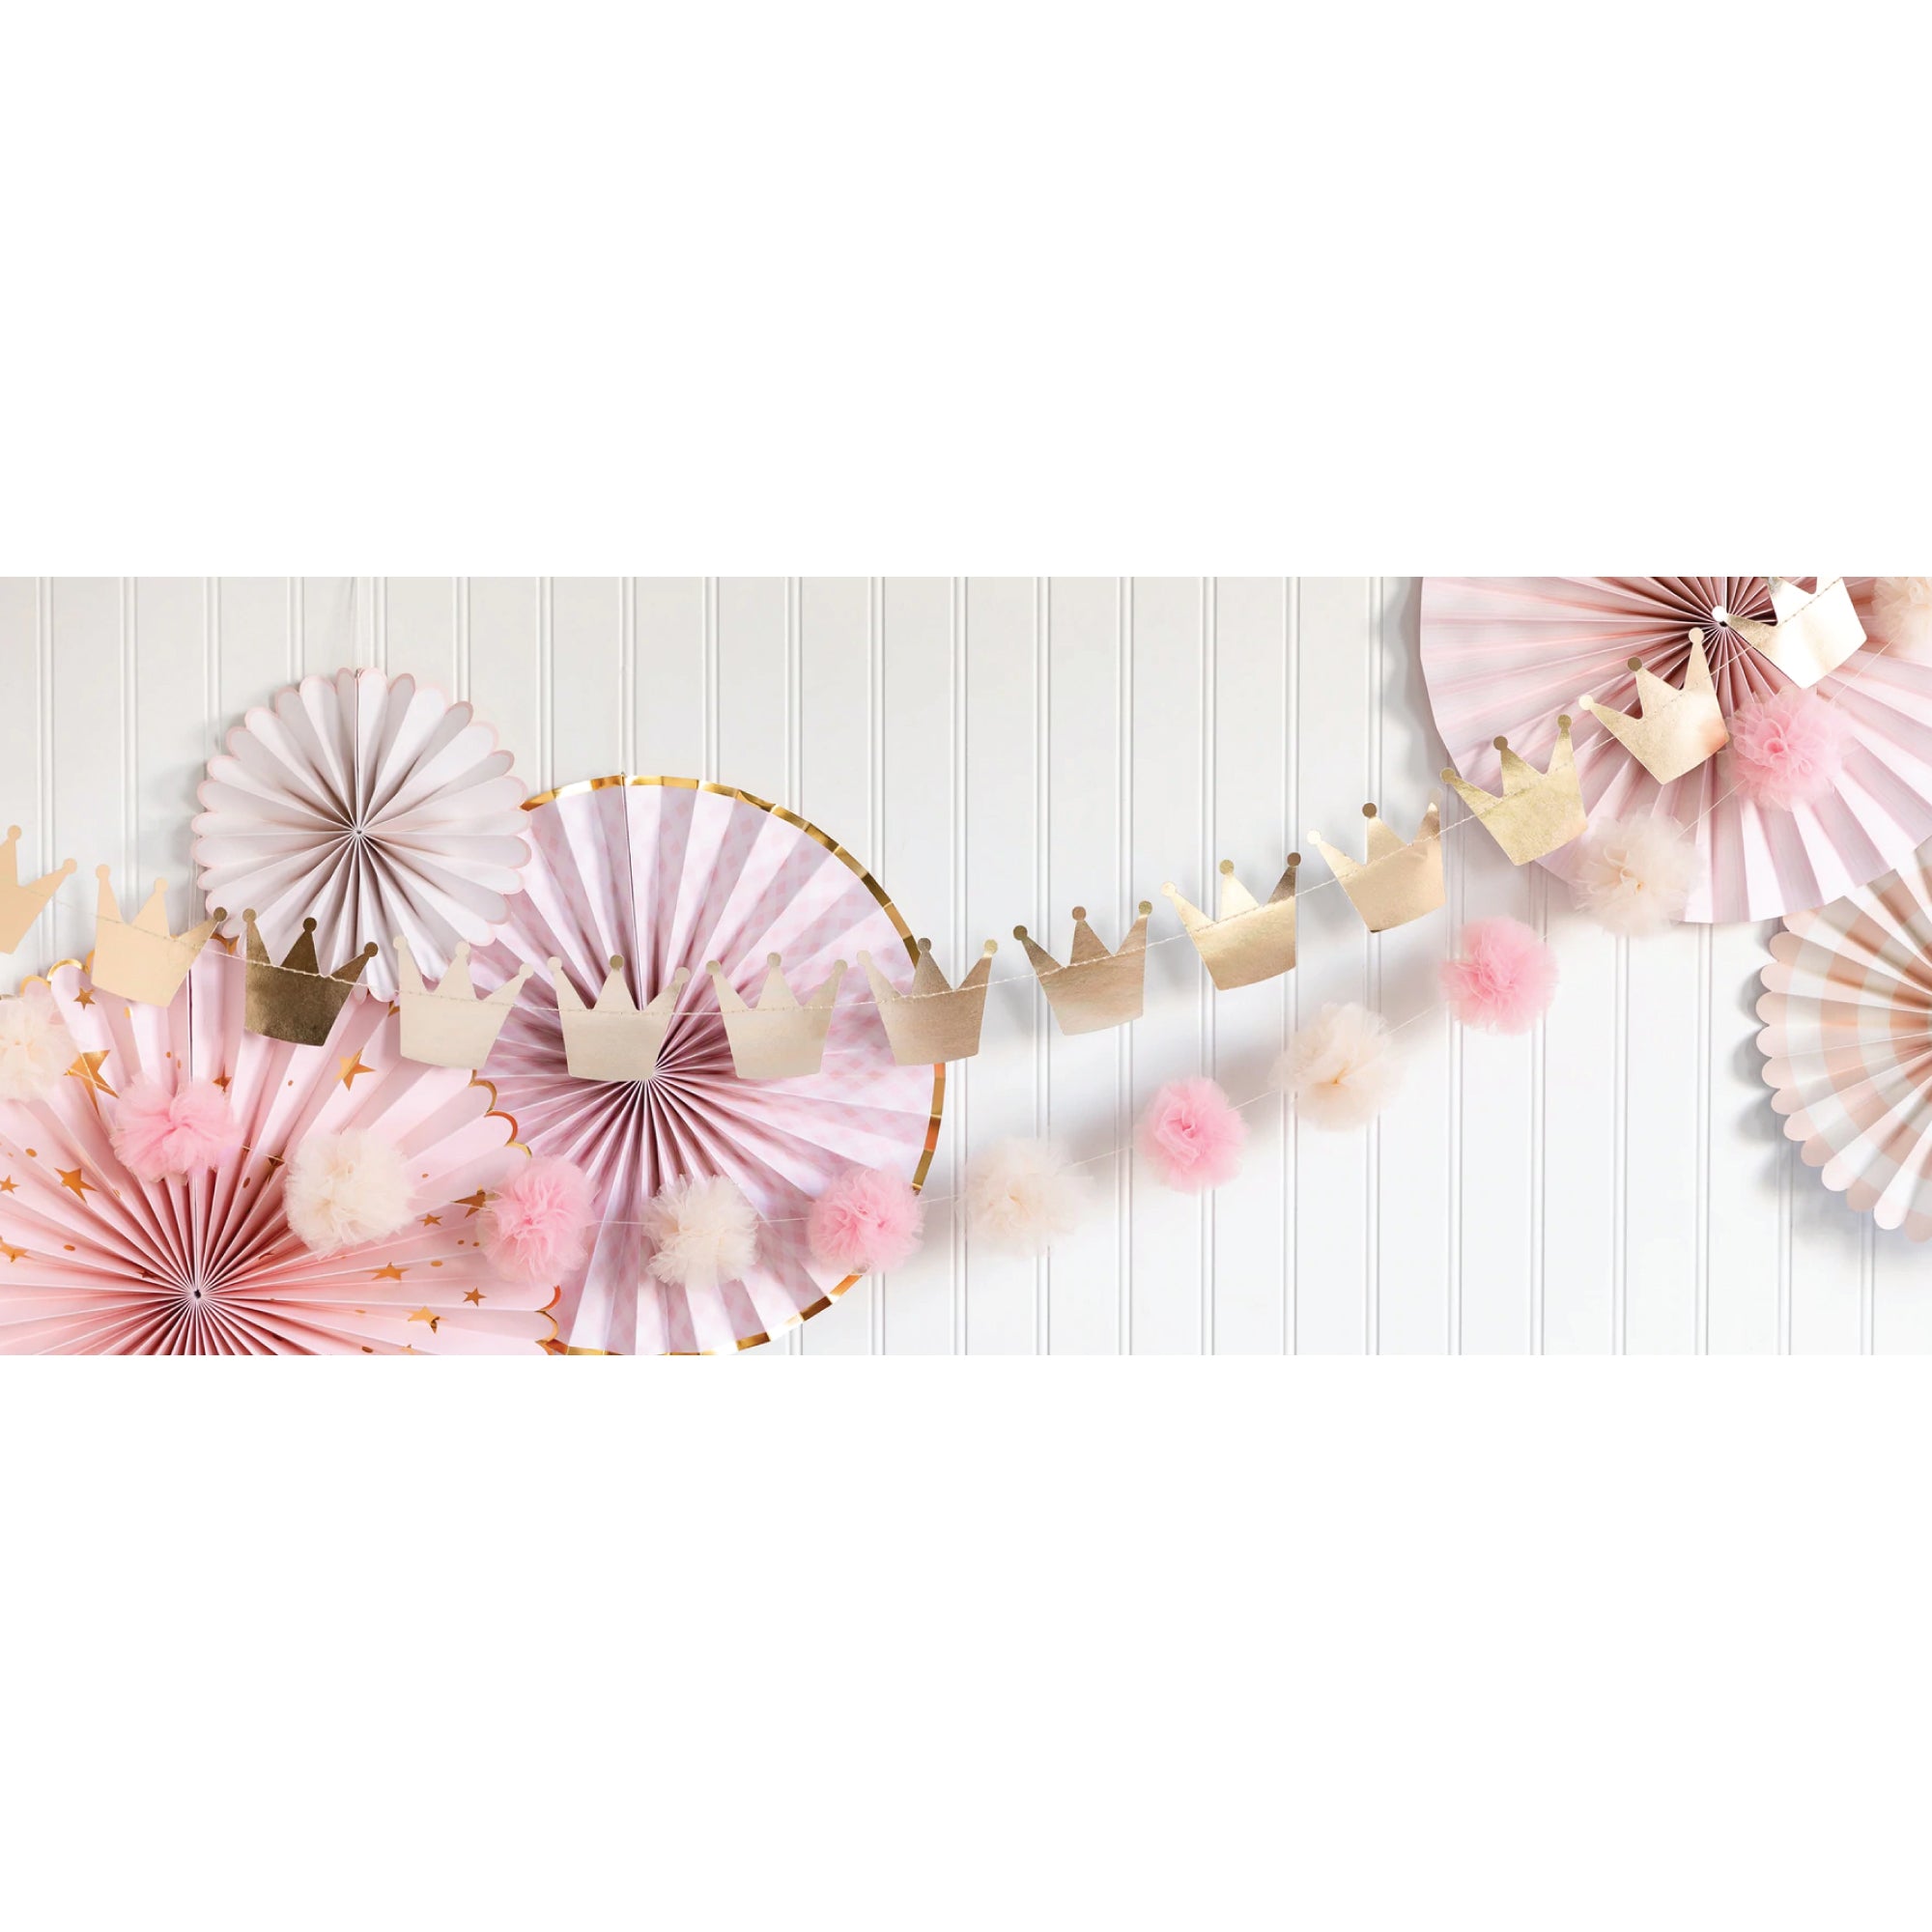 Magical Princess Crown & Pom Pom Garland 10ft | The Party Darling